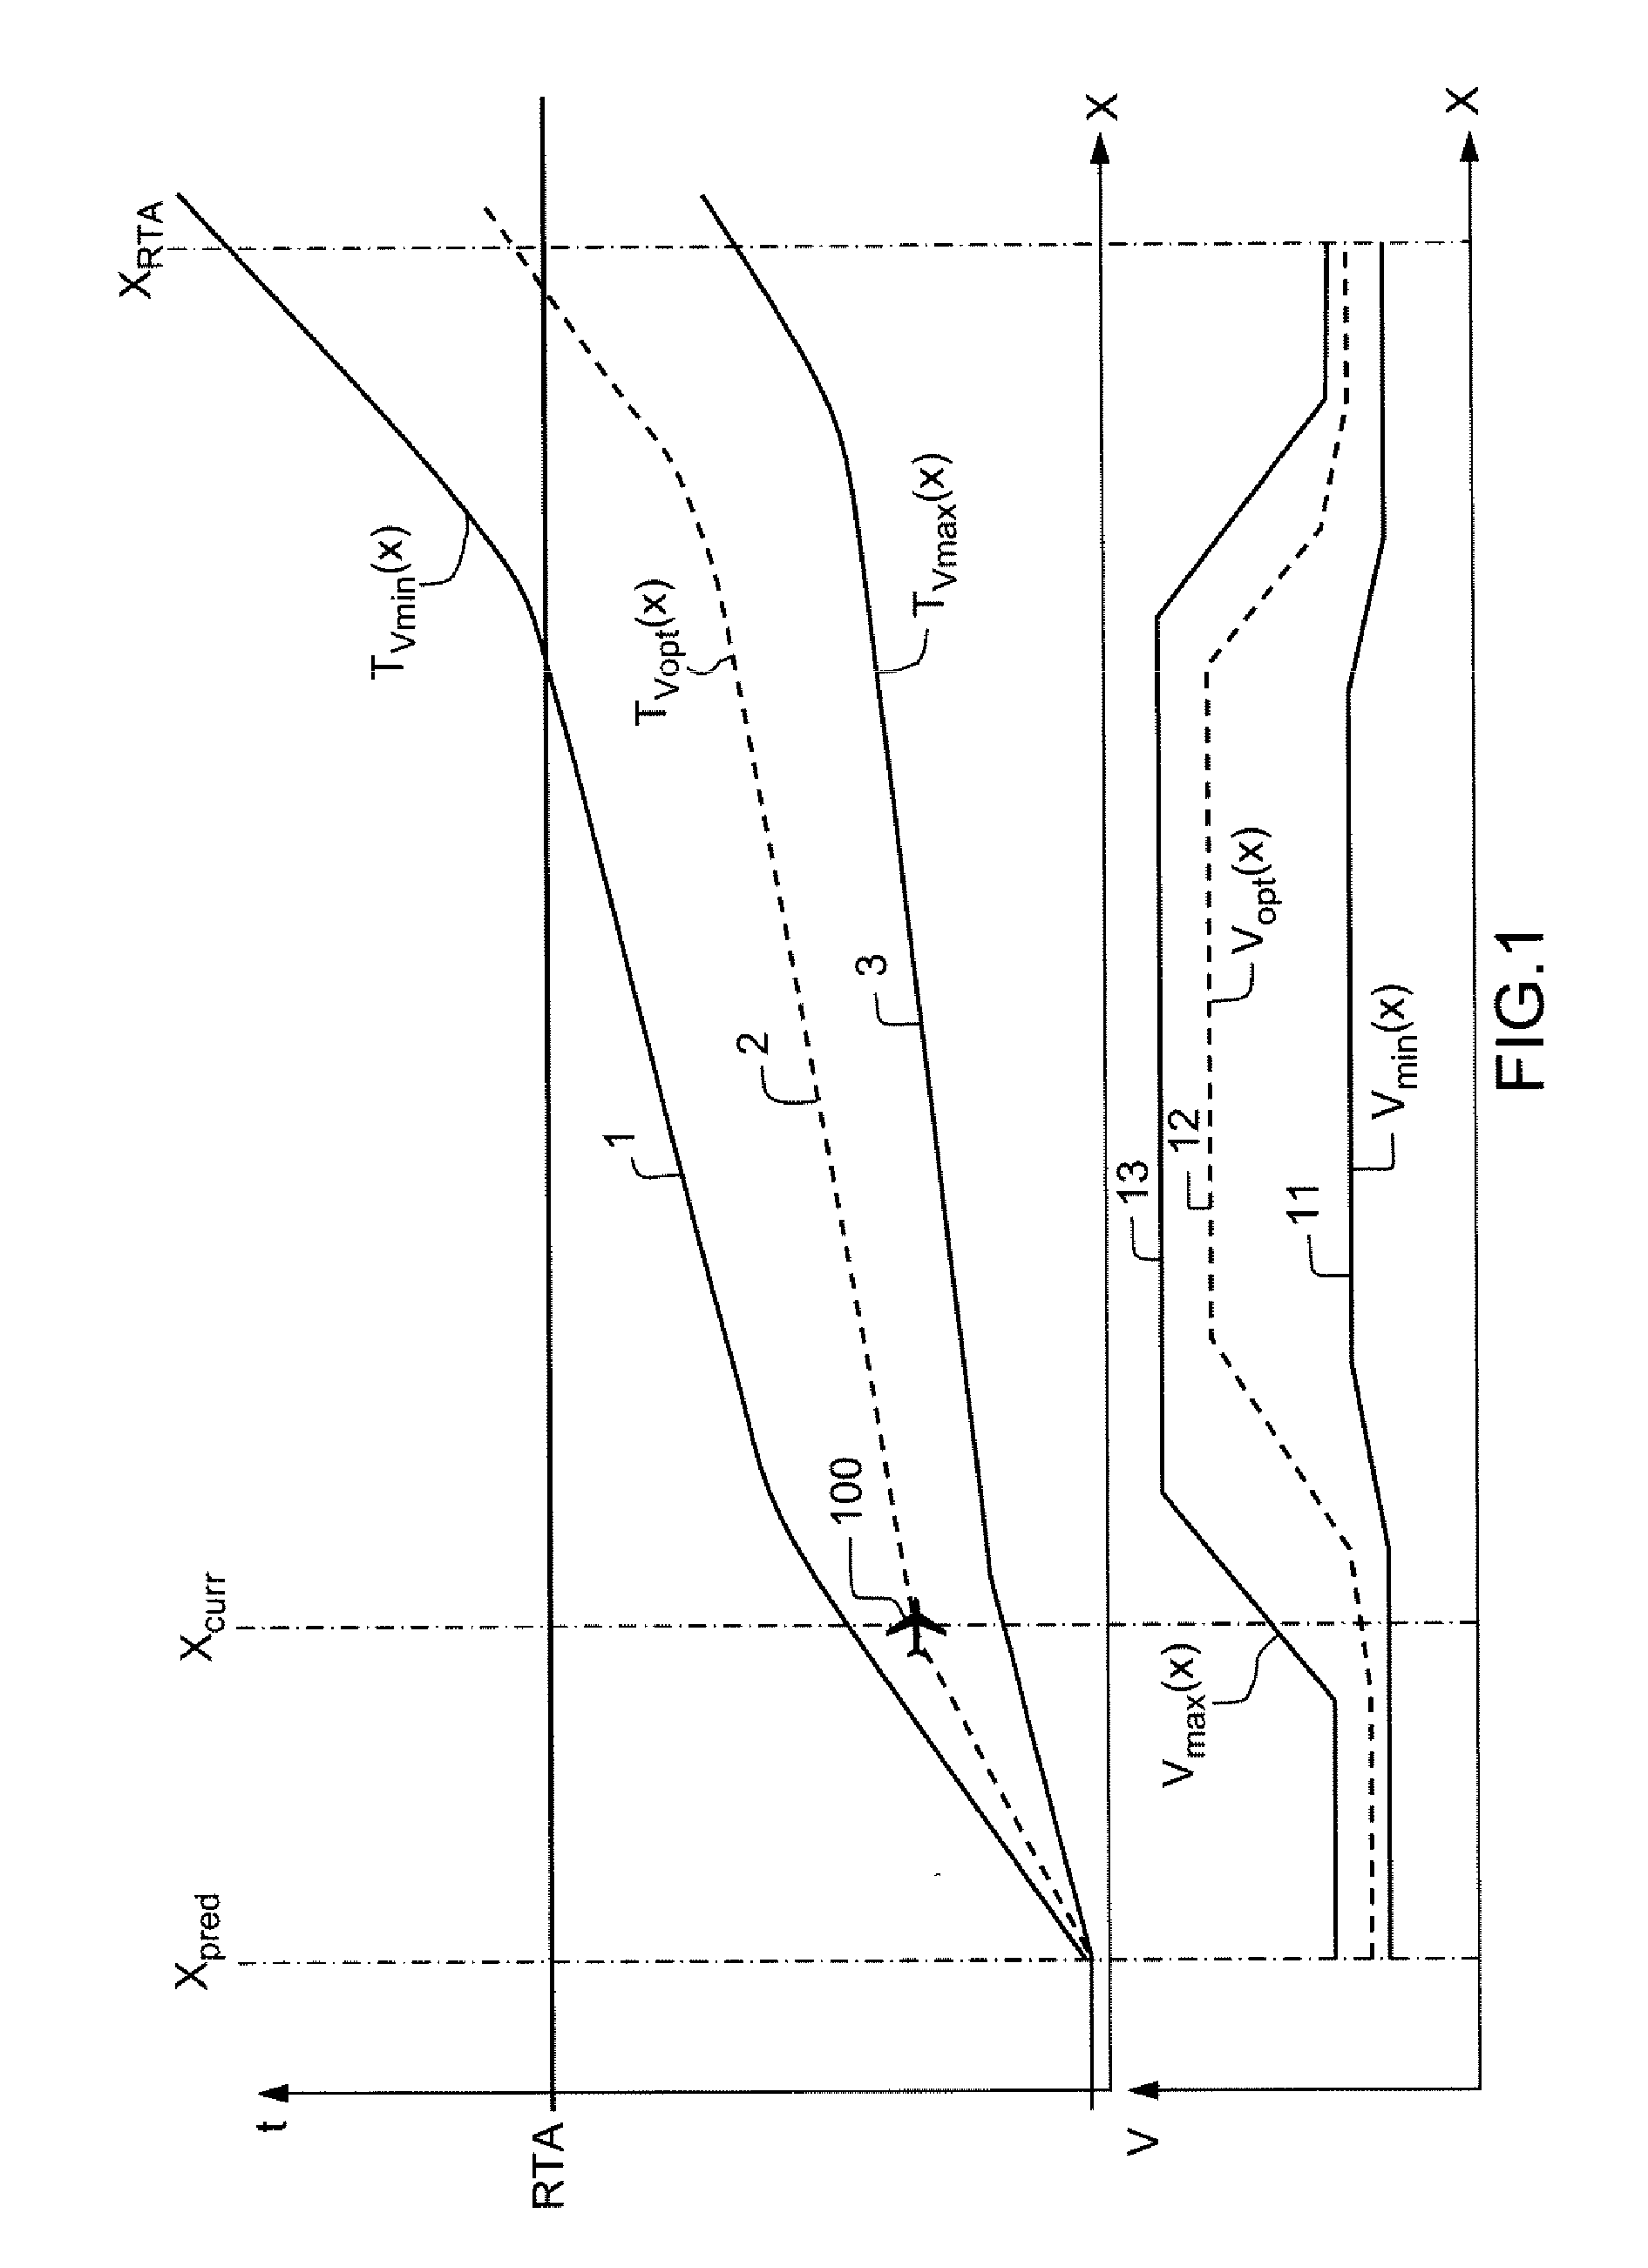 Method for Continuously and Adaptively Generating a Speed Setpoint for an Aircraft to Observe an RTA